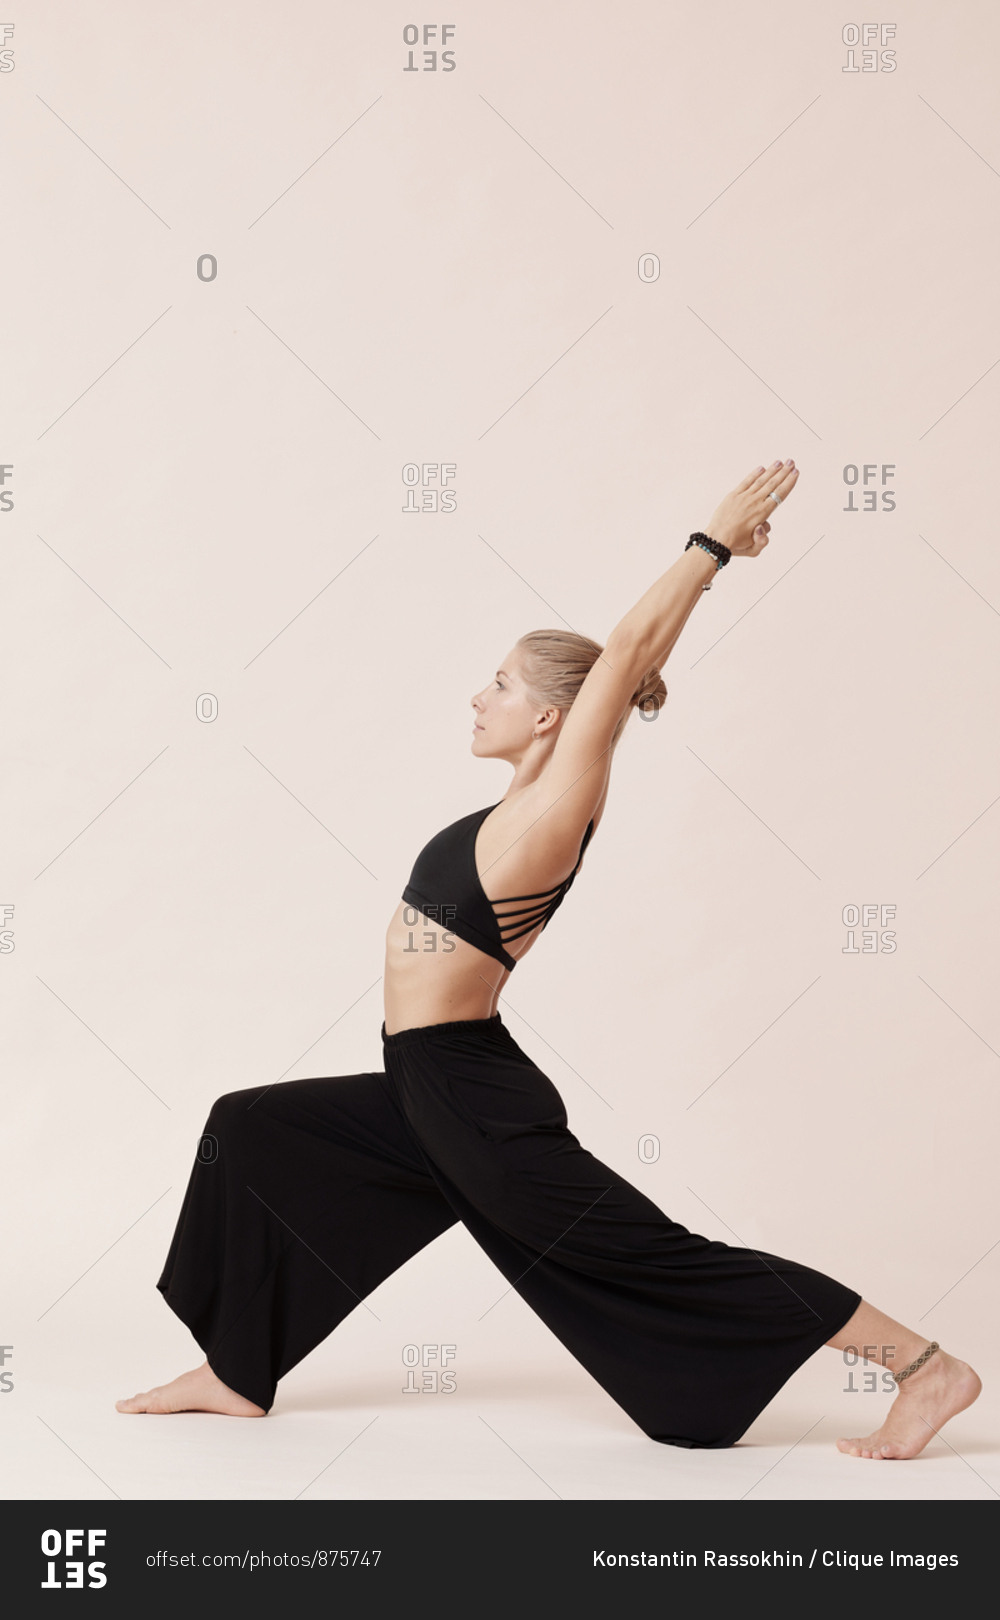 Good-looking young woman wearing black outfit practicing high lunge asana studio shot